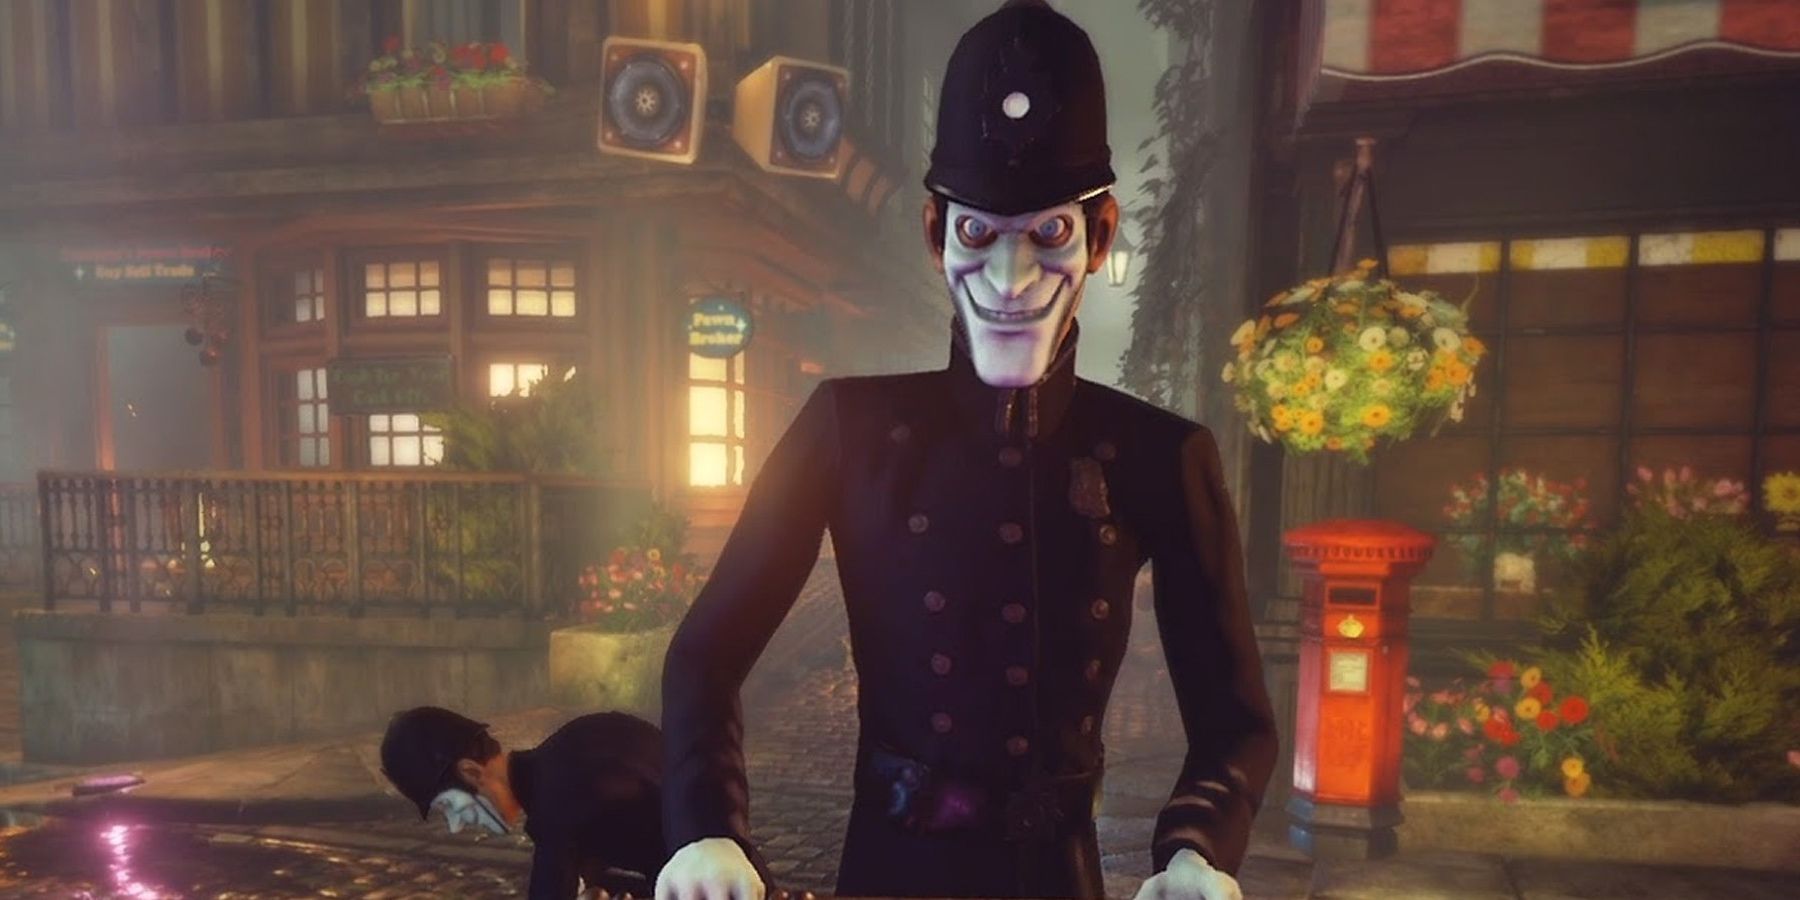 An antagonistic Bobby facing the camera with a creepy white Happy Face mask, and another behind him examining something on the street of Wellington Wells.